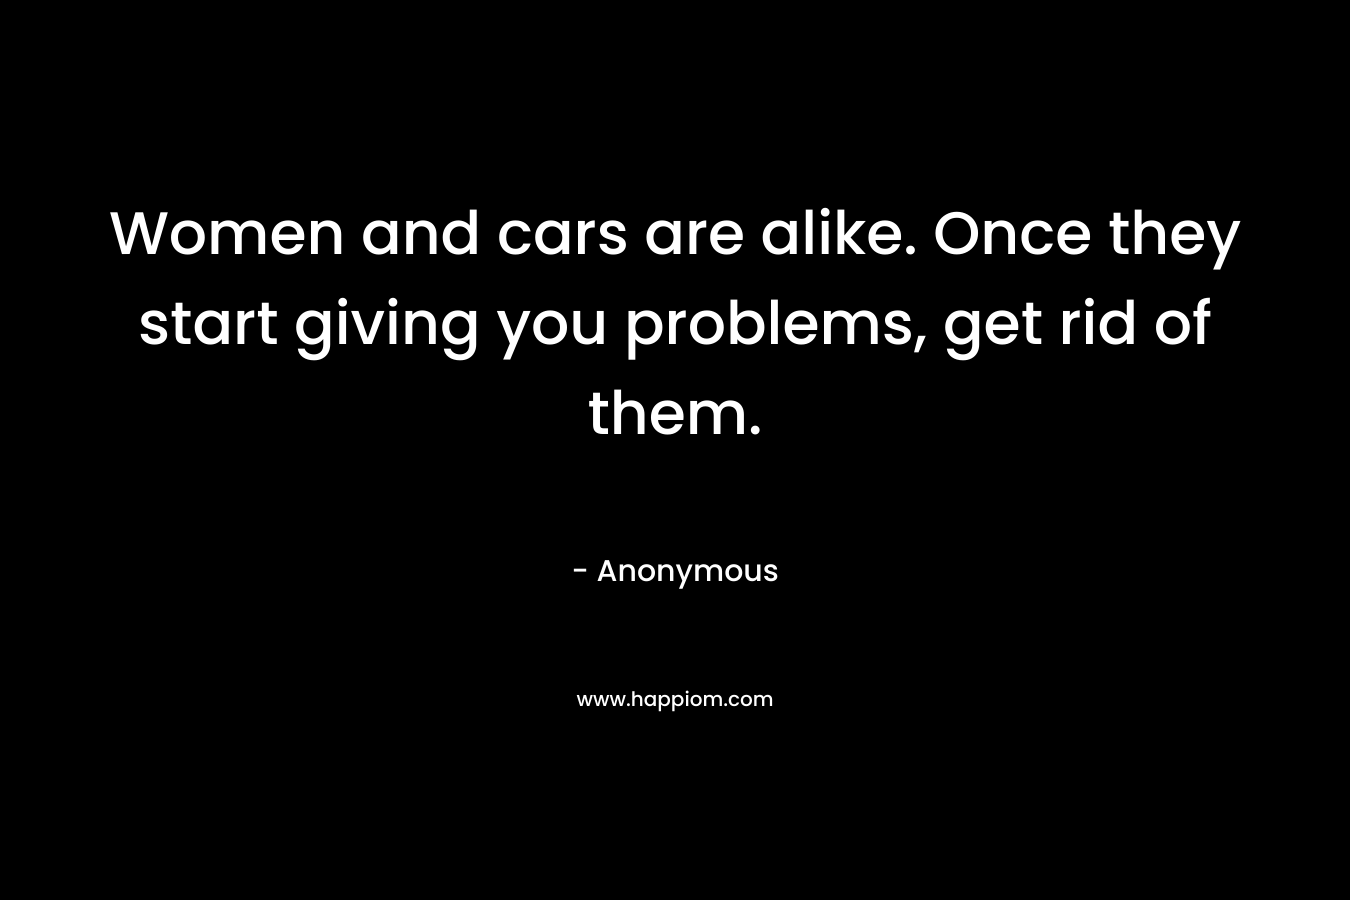 Women and cars are alike. Once they start giving you problems, get rid of them. – Anonymous